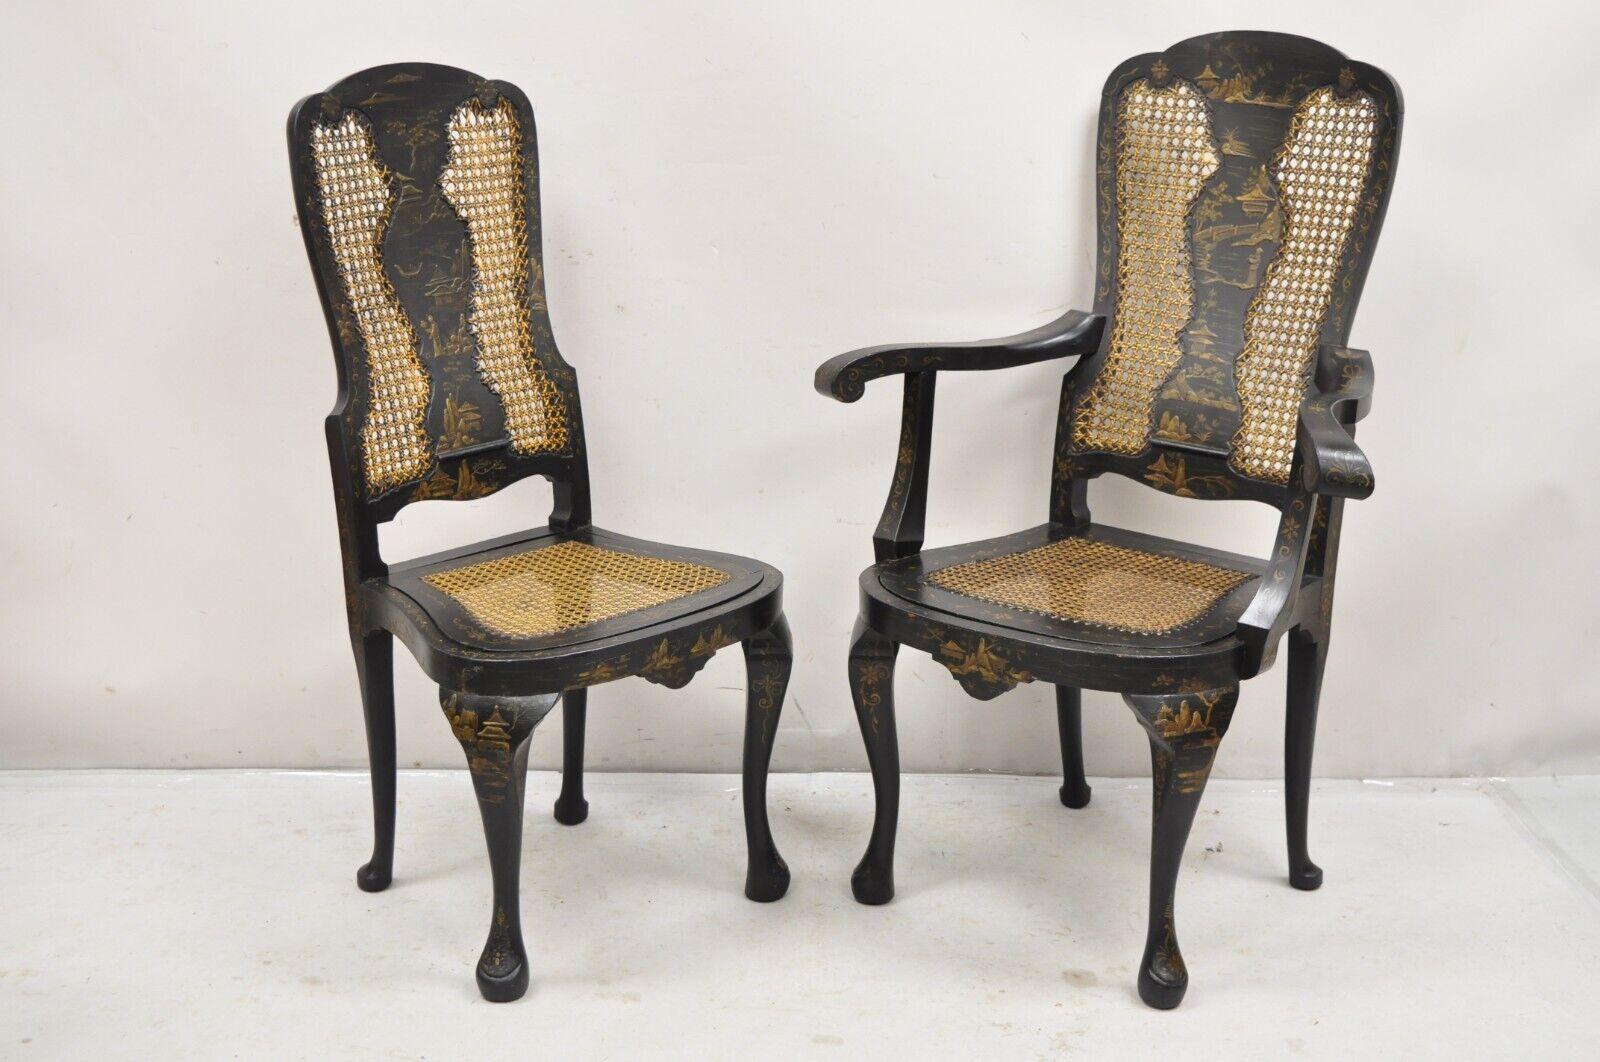 Antique Chinoiserie English Queen Anne Hand Painted Floral Cane Dining Chairs - Set of 4. Set includes 2 side chairs and 2 armchairs with drop cane seats and remarkable floral painted detail. Circa 1900.
Measurements: 
(2) Armchairs: 44.5